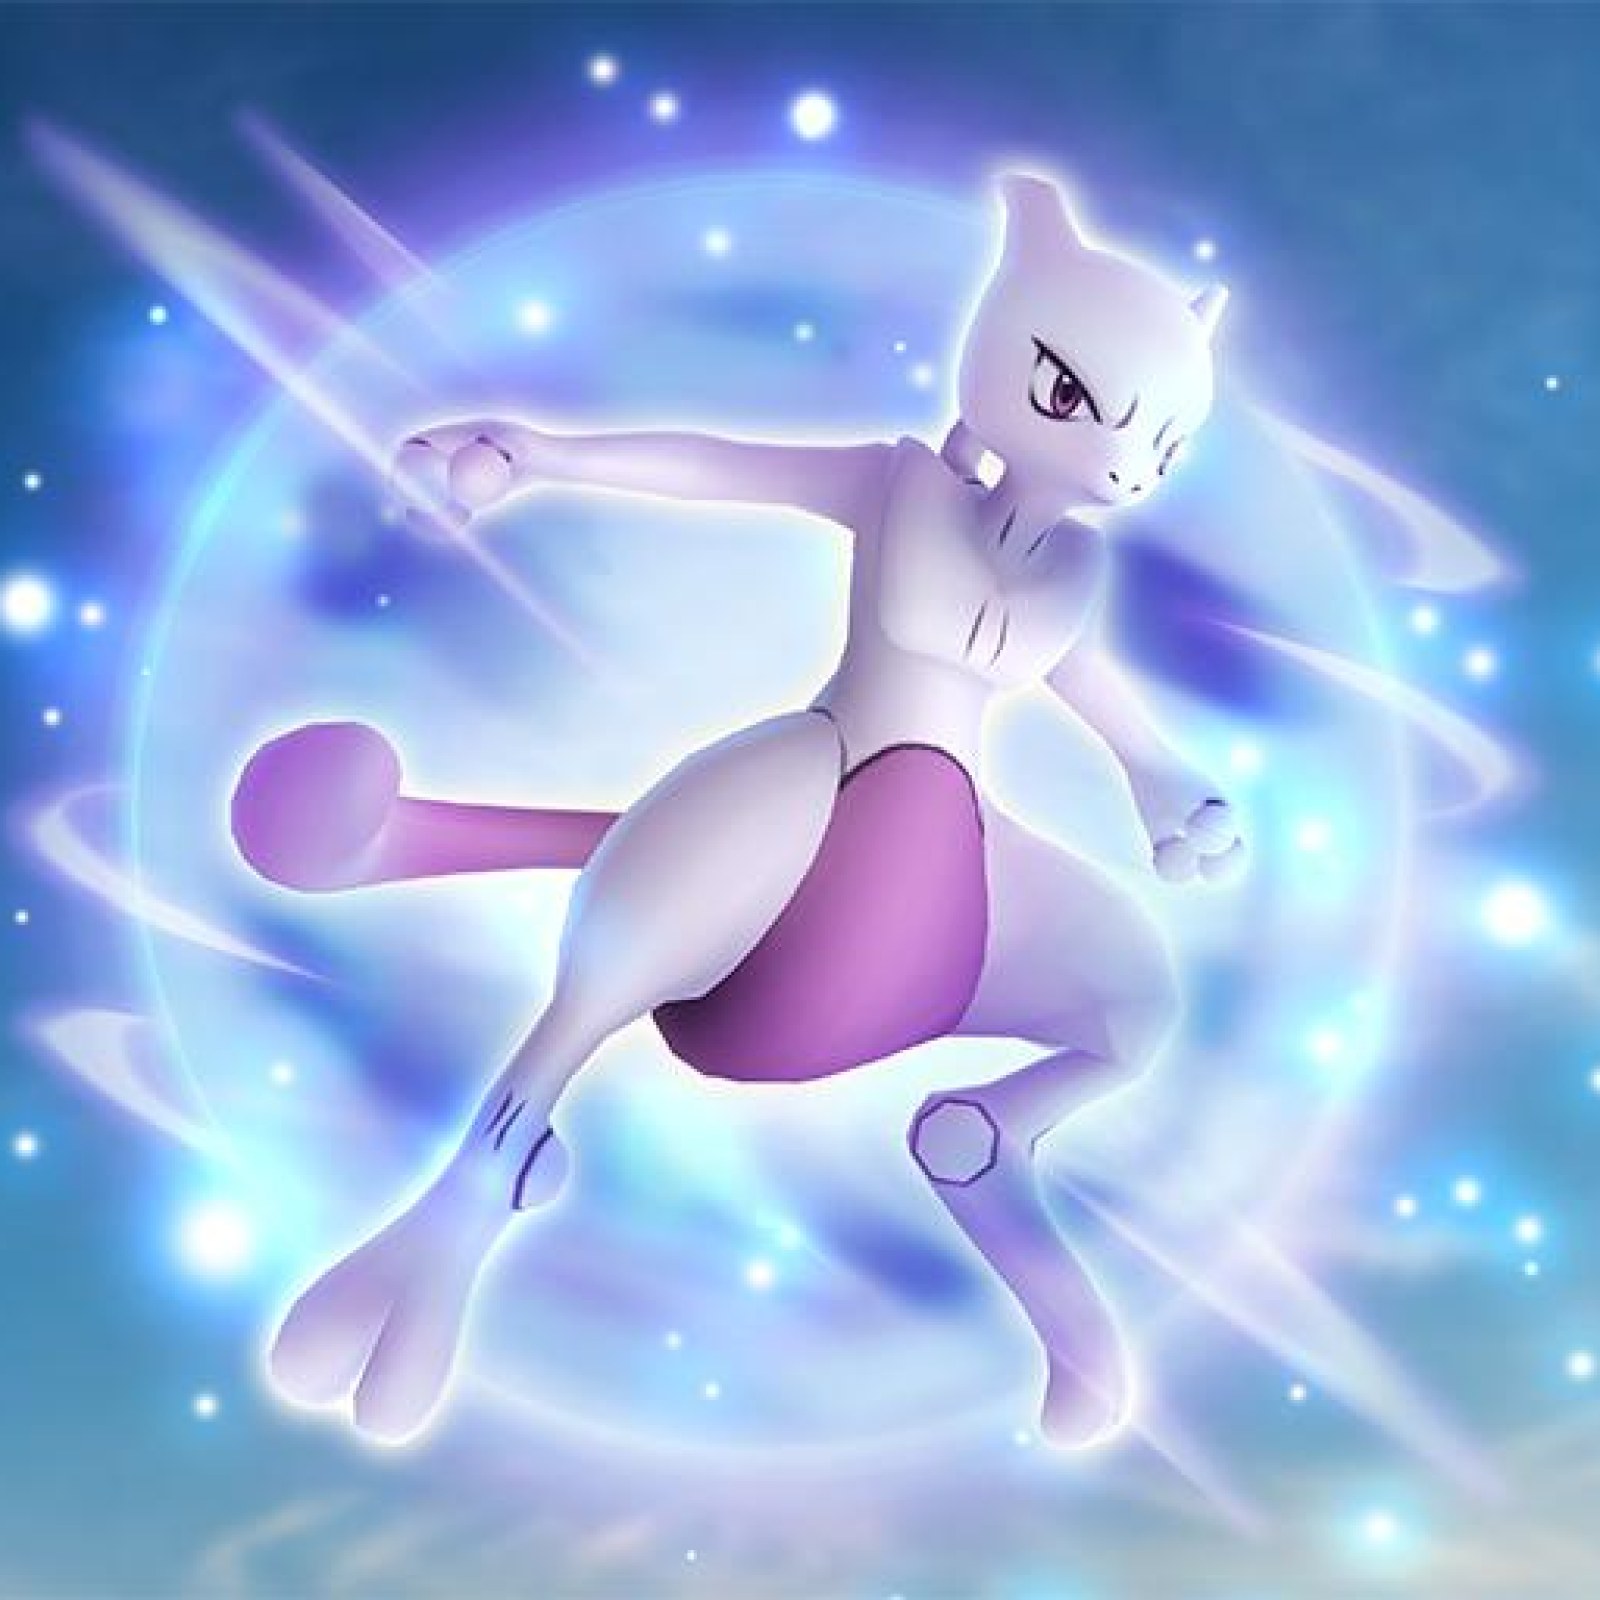 Help with my Mewtwo counters